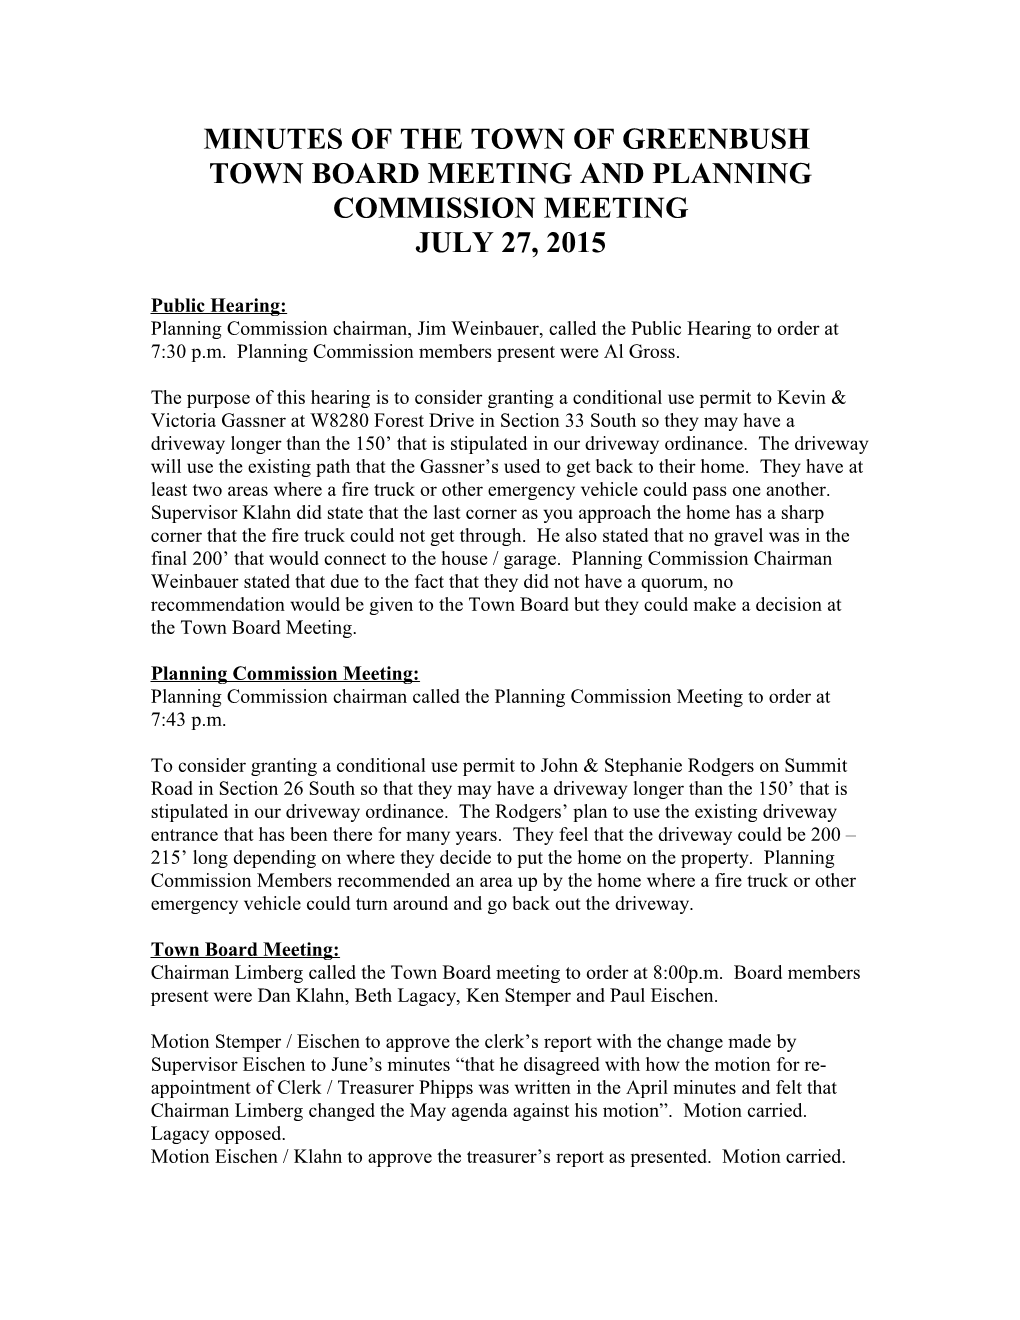 Town Board Meeting and Planning Commission Meeting